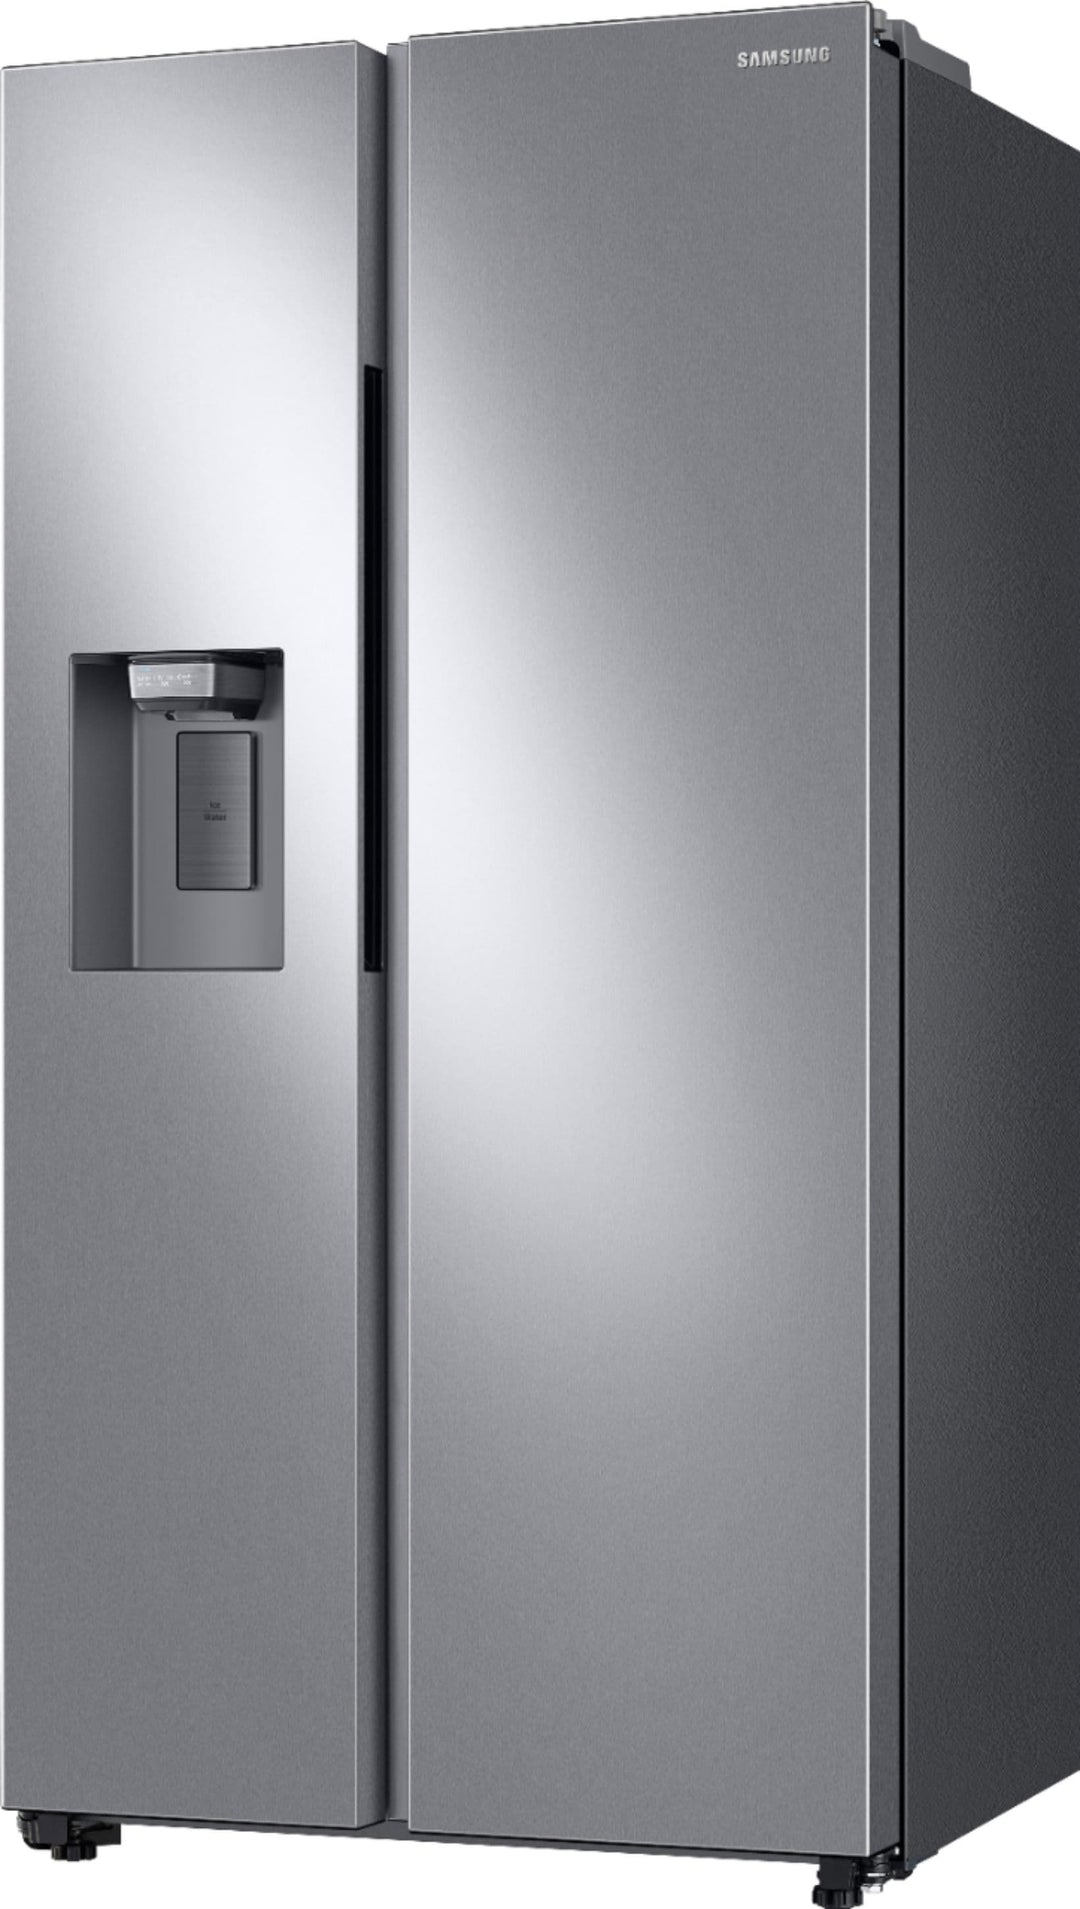 Samsung - 22 Cu. Ft. Side-by-Side Counter-Depth Refrigerator - Stainless steel_6